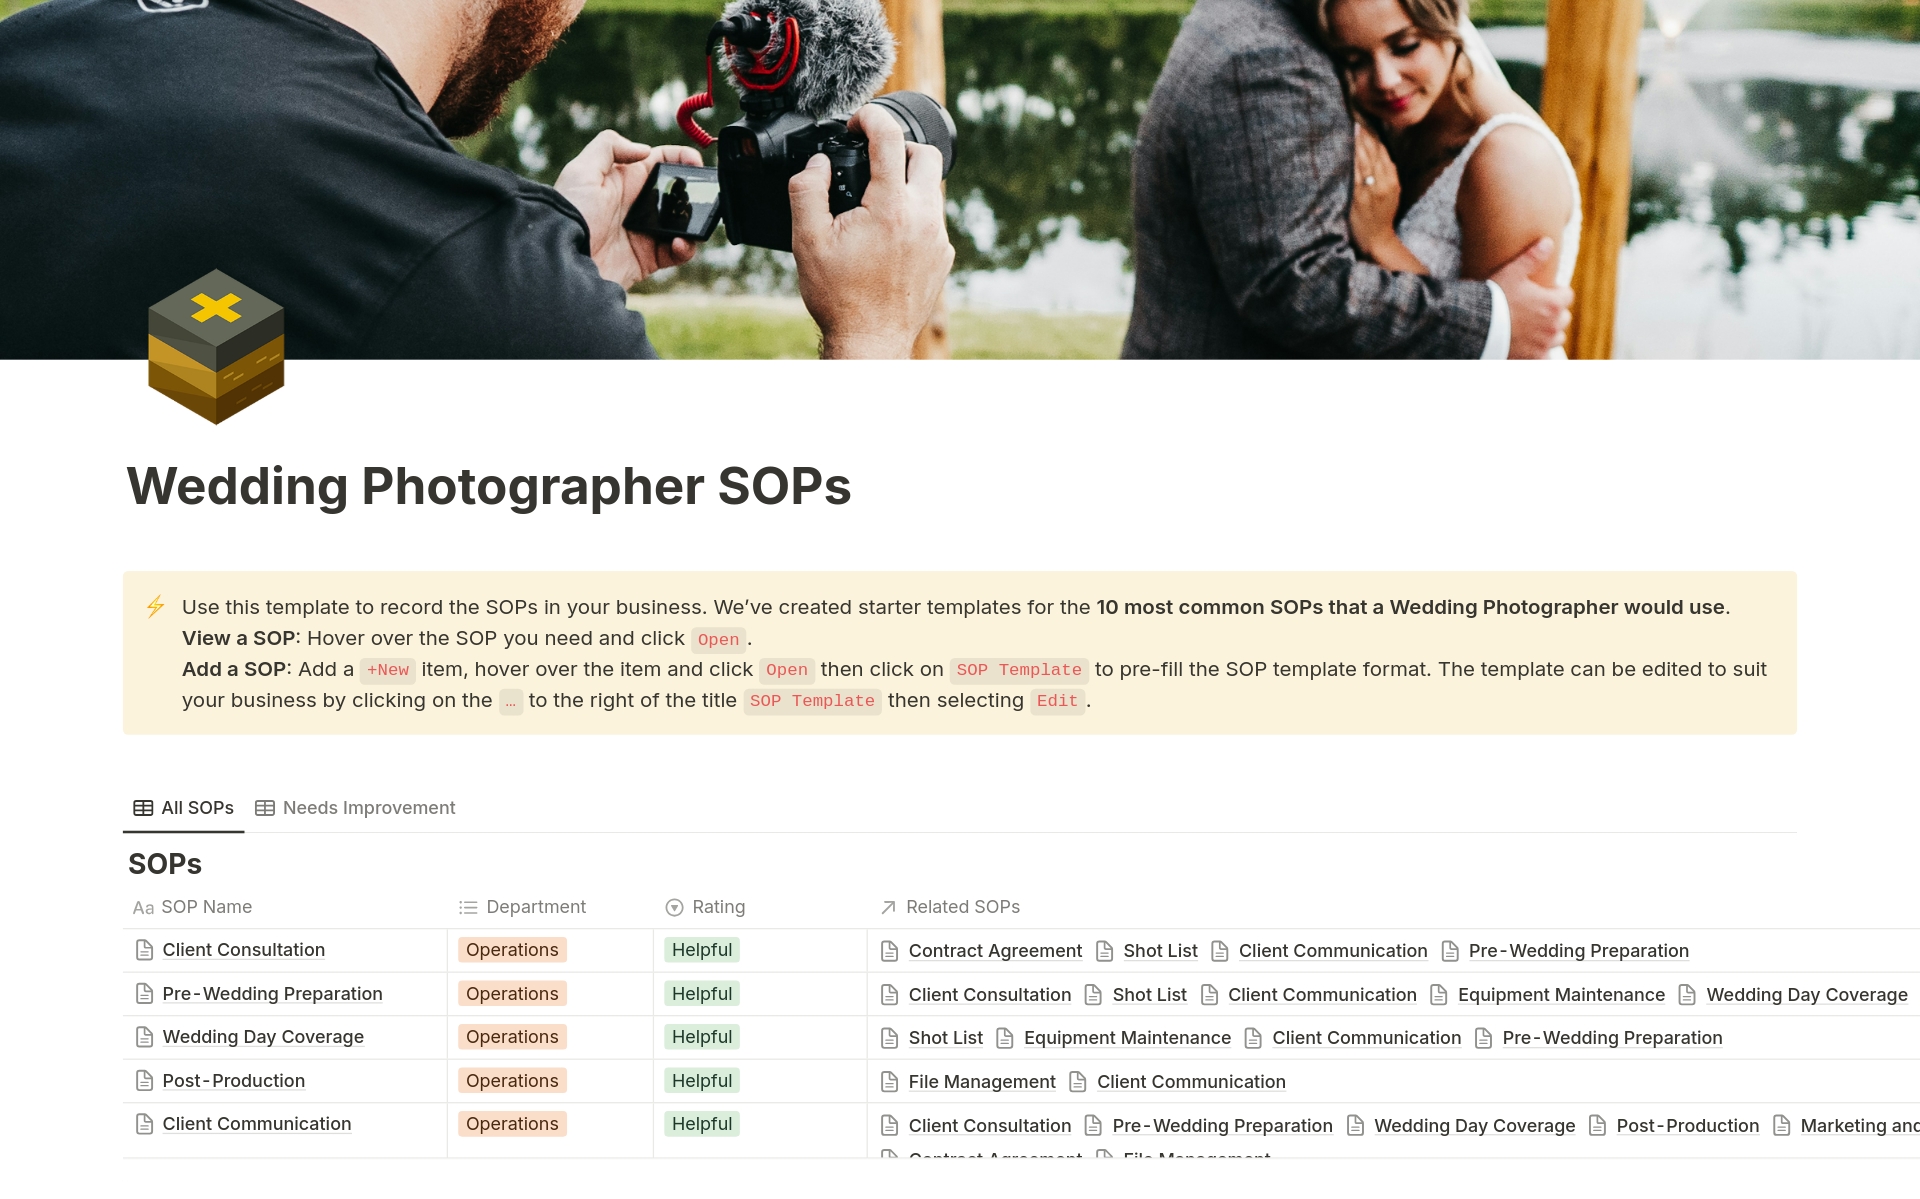 These standard operating procedures (SOPs) outline a comprehensive approach to wedding photography, encompassing client interactions, pre-wedding preparations & more. Includes 20+ pages of best practice SOPs to save you 10+ hours of research.